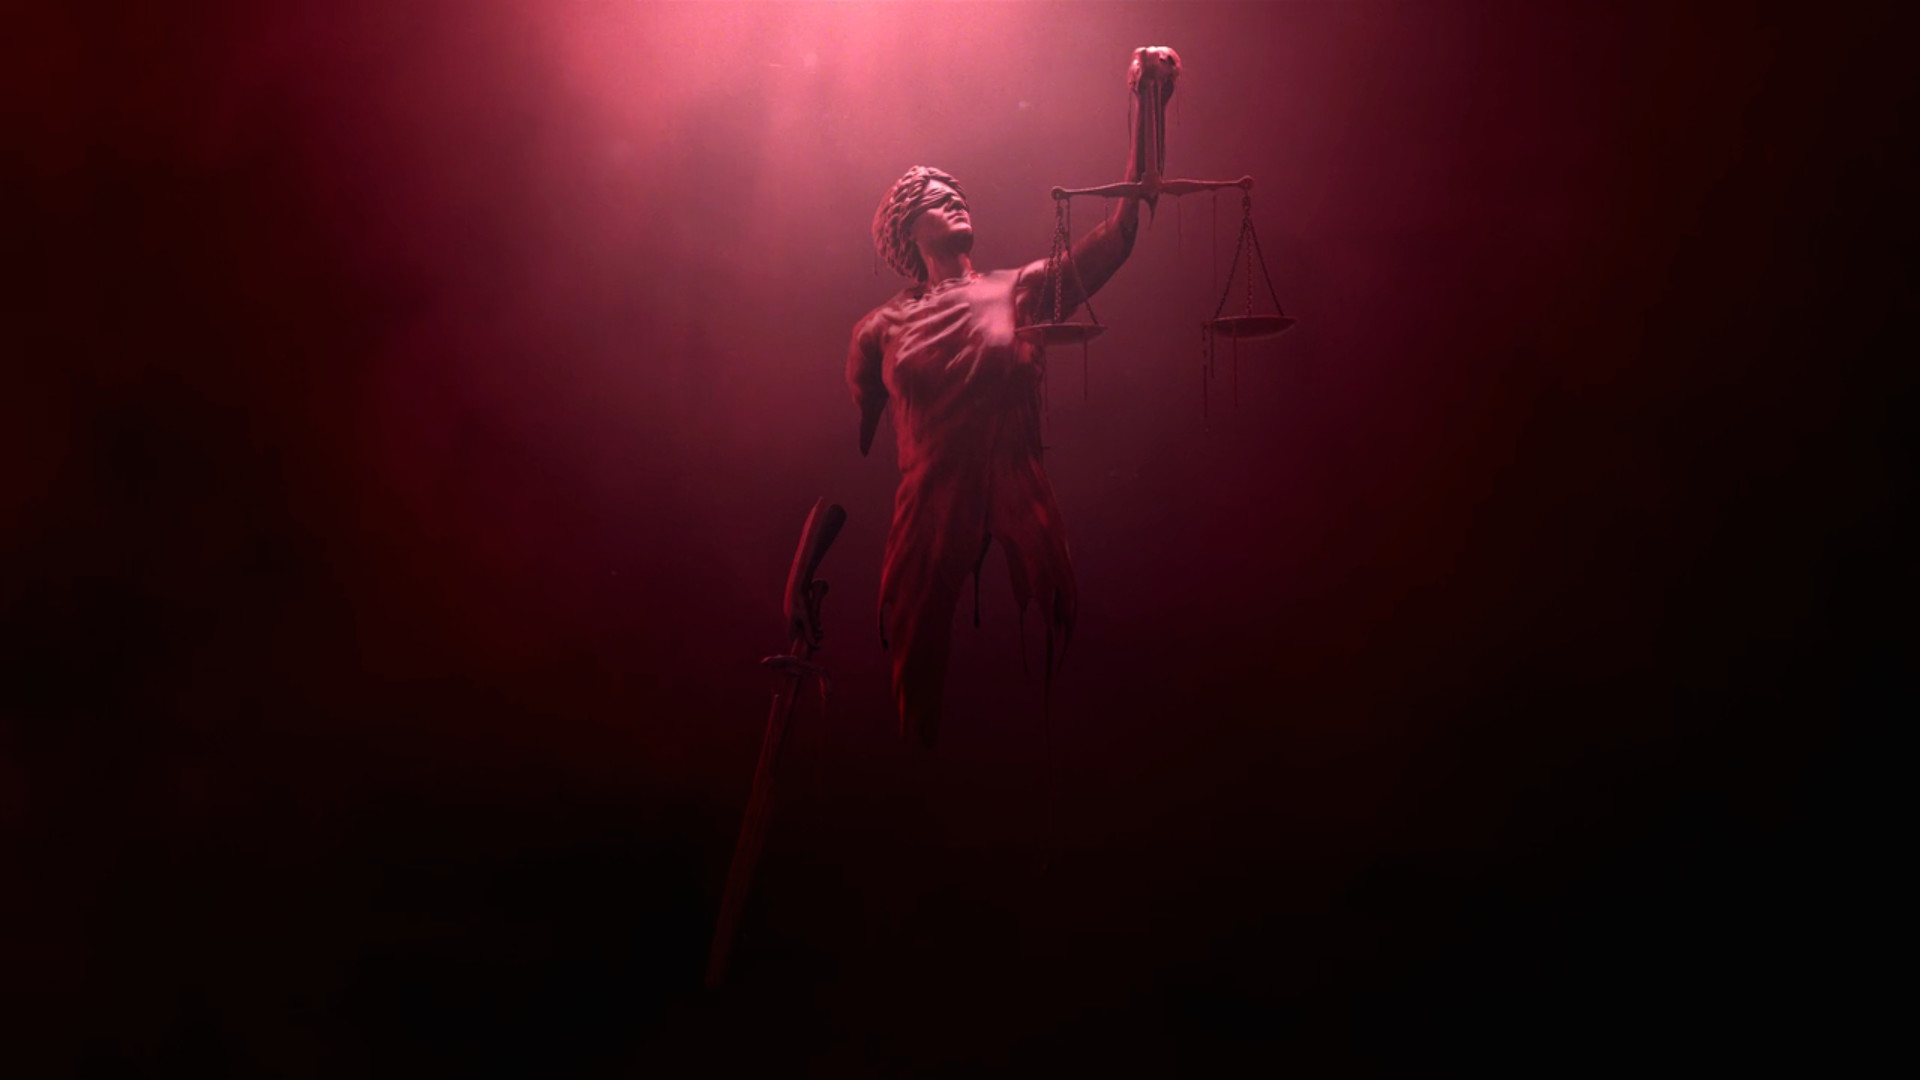 1920x1080 here is another one someone else posted of the intro showing Lady Justice.